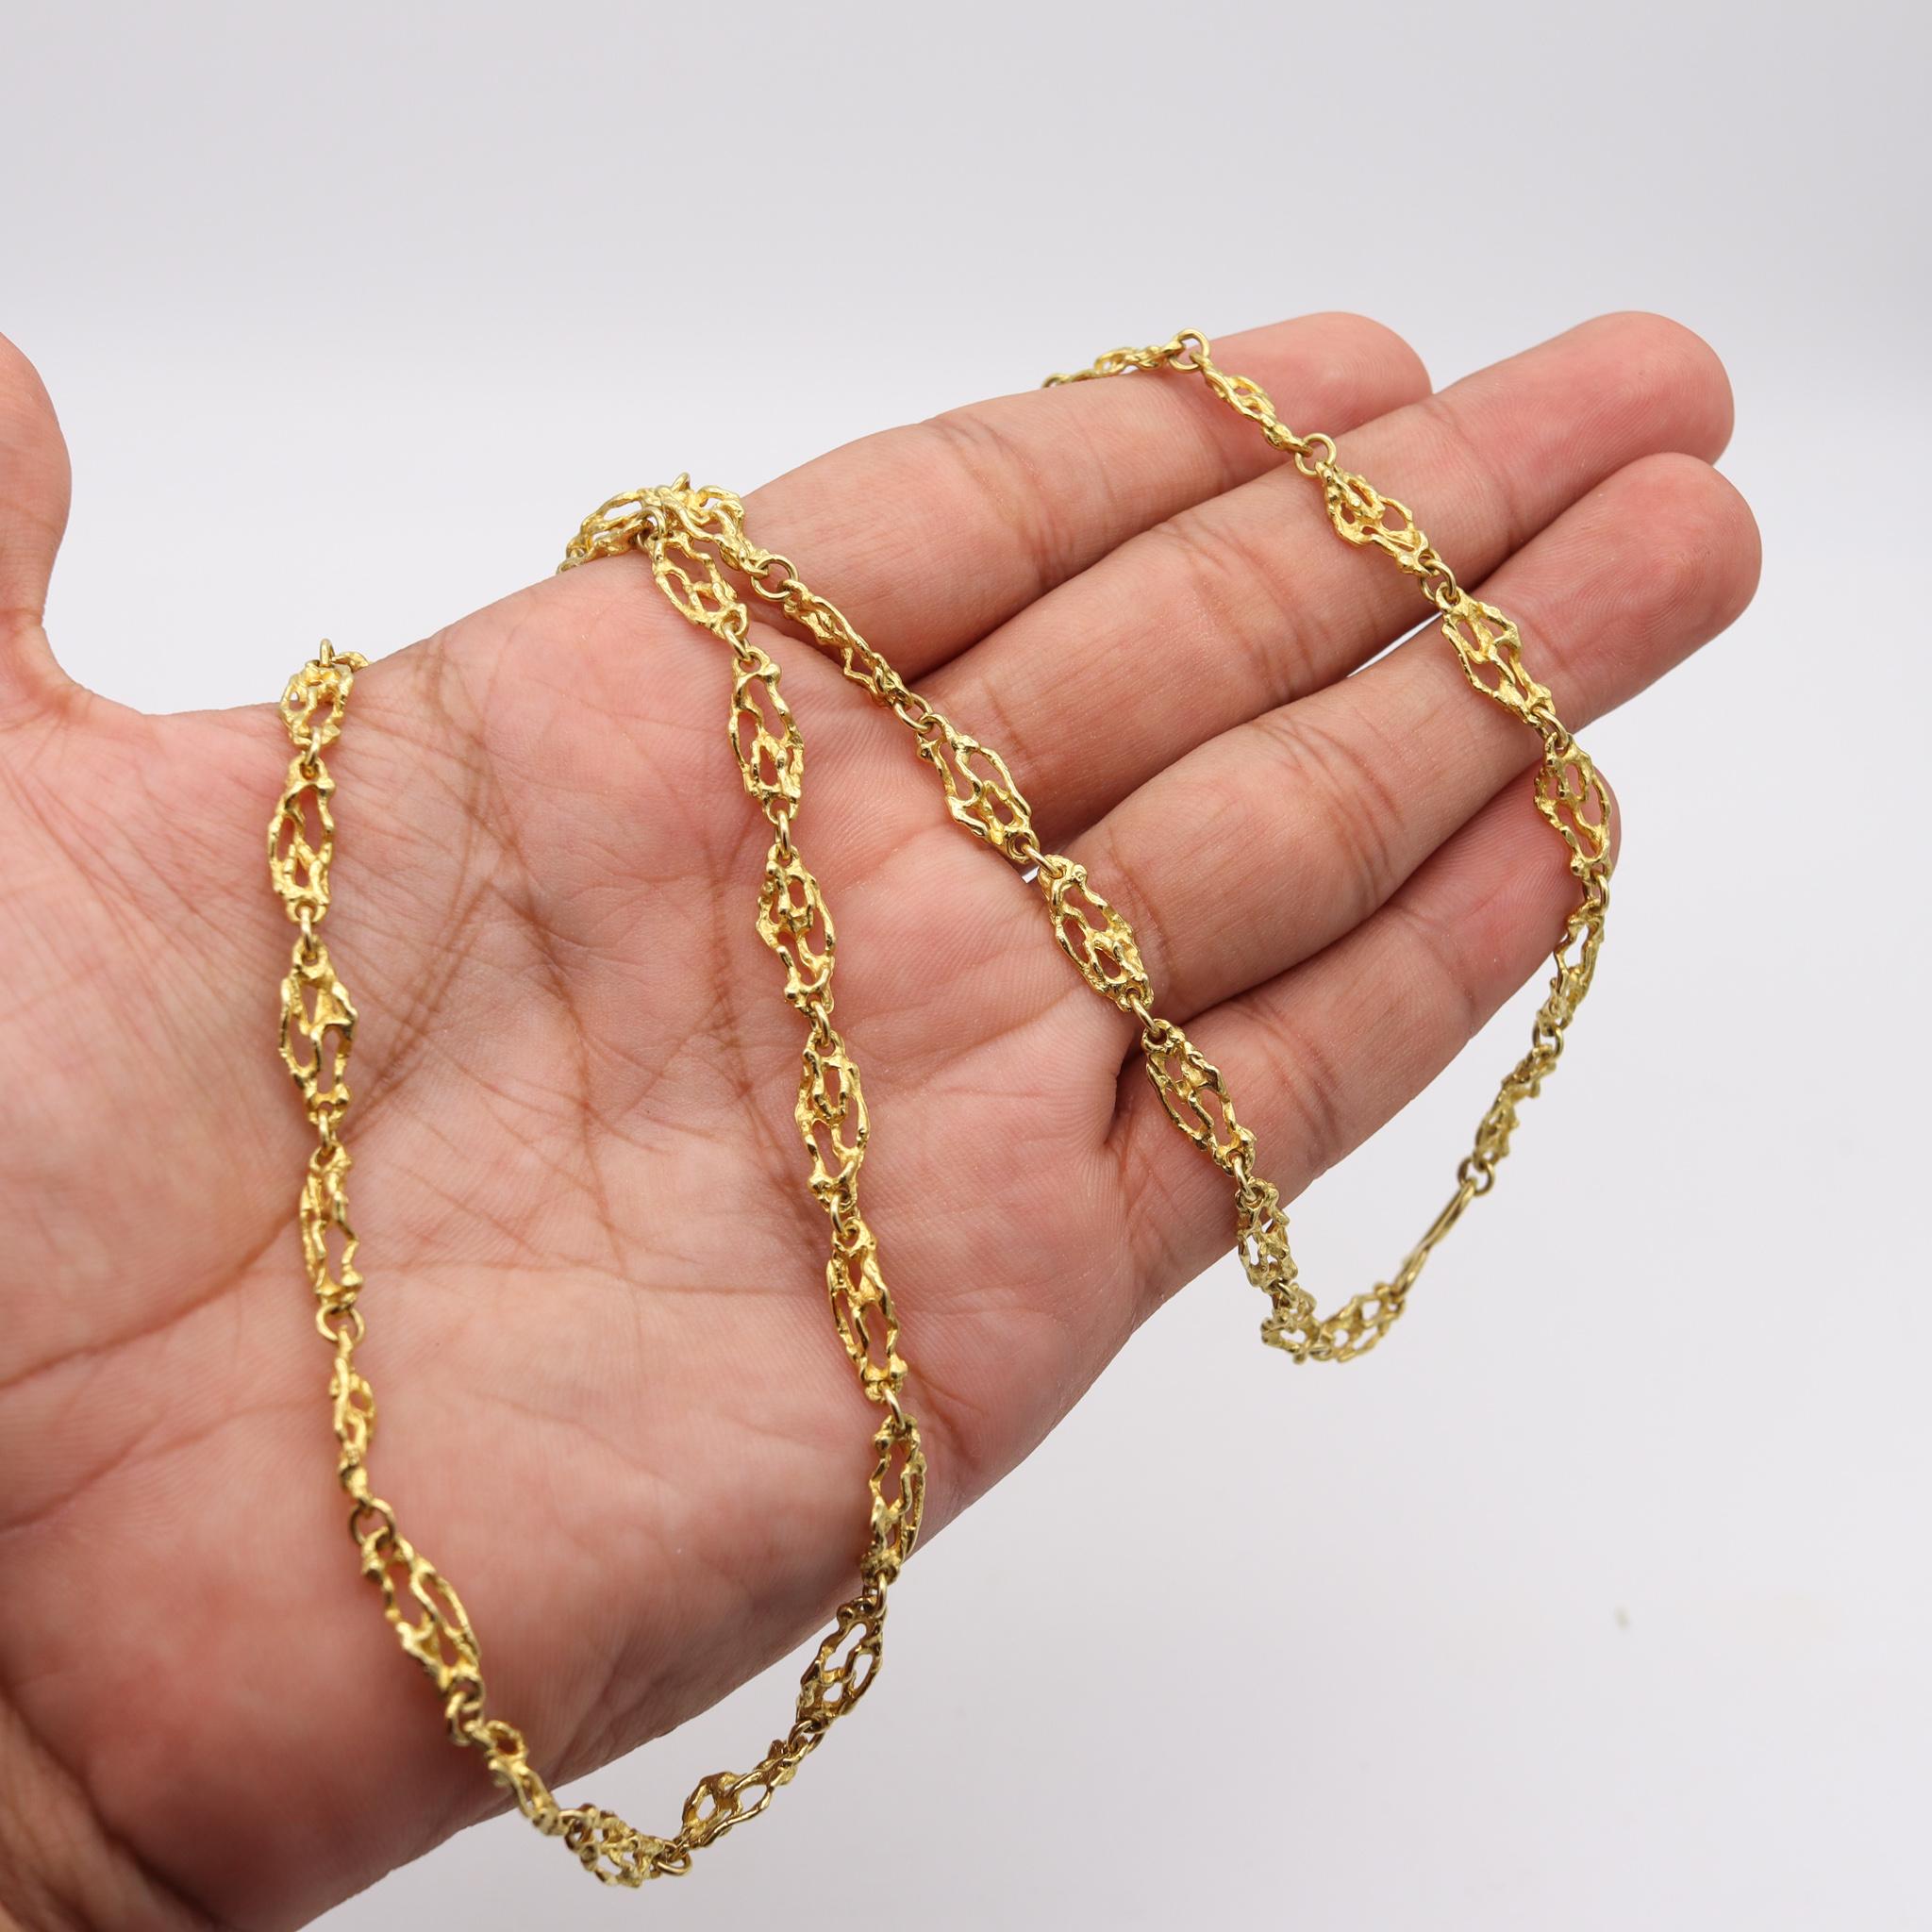 Retro 1970 Modernist Chain with Organic Textured Links in 18Kt Yellow Gold For Sale 3